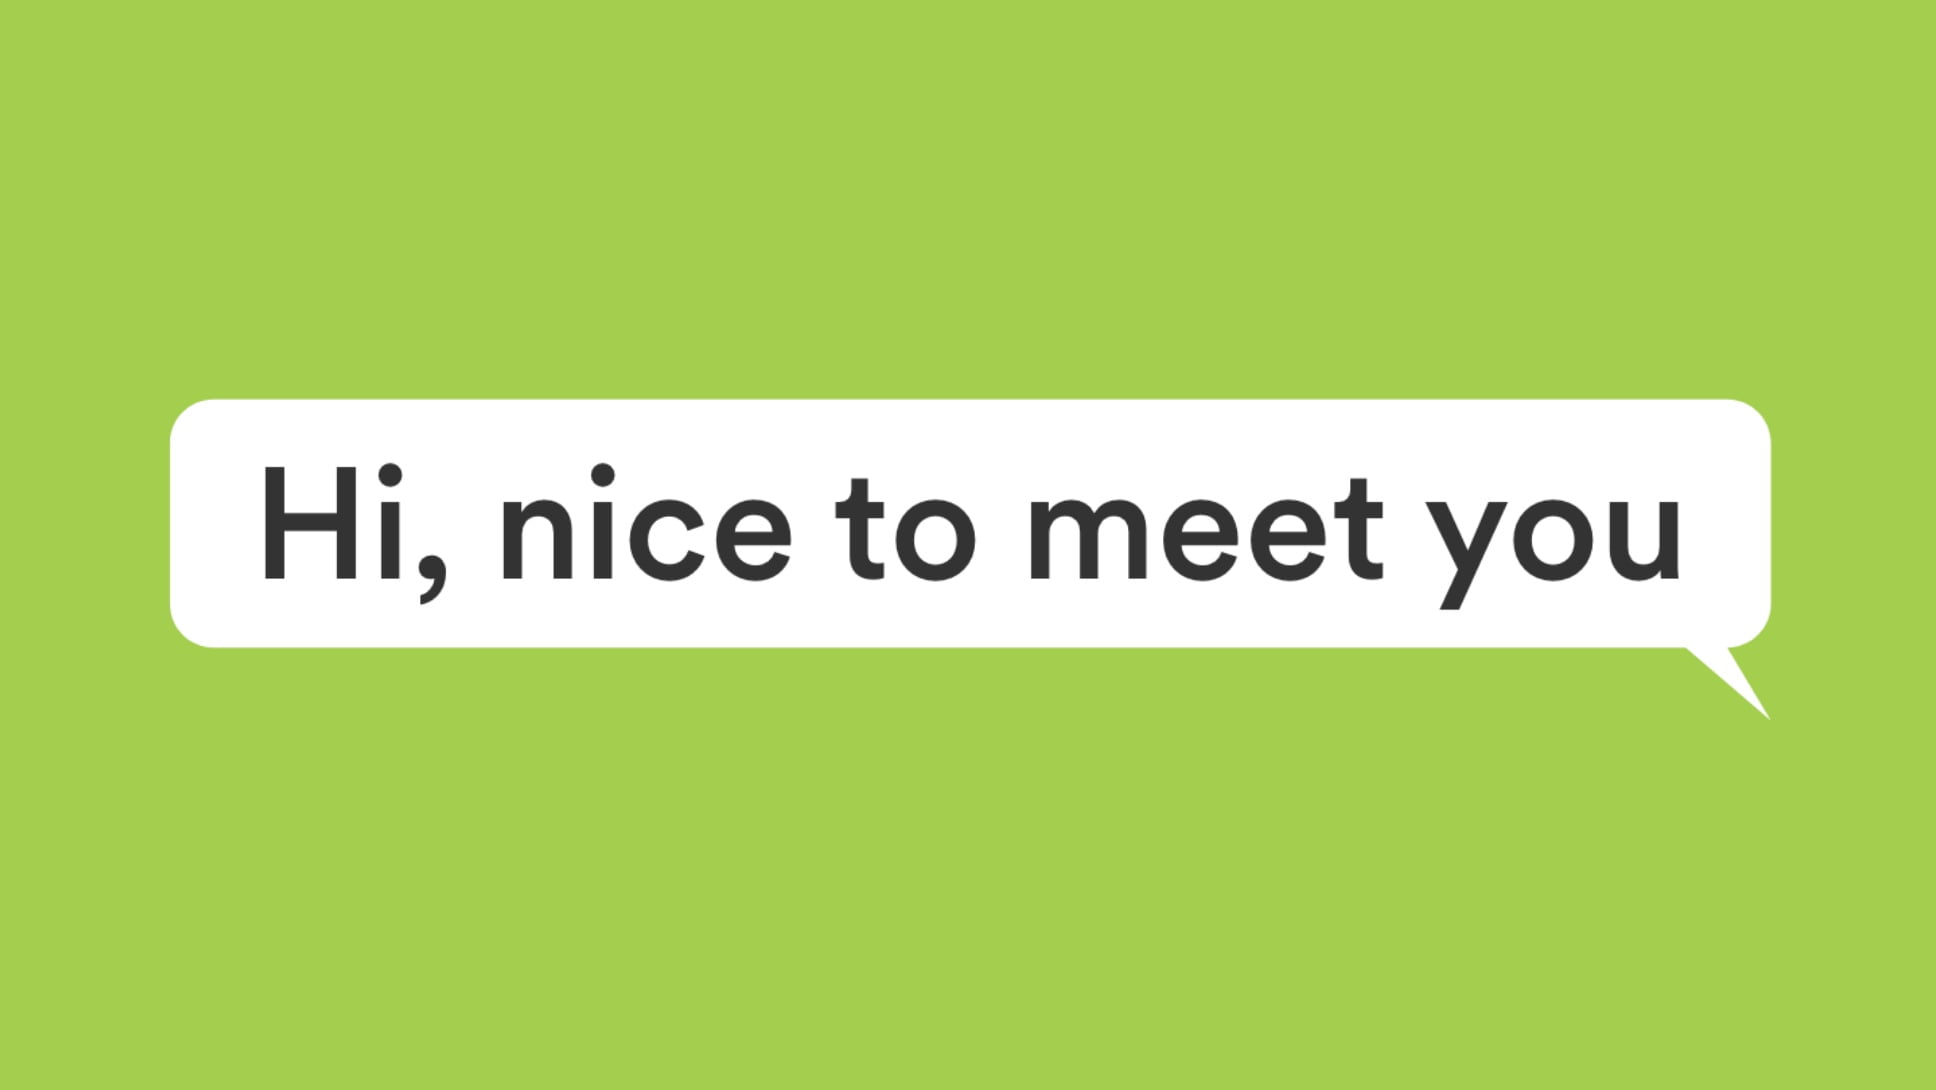 Talk bubble that reads “Hi, nice to meet you.”